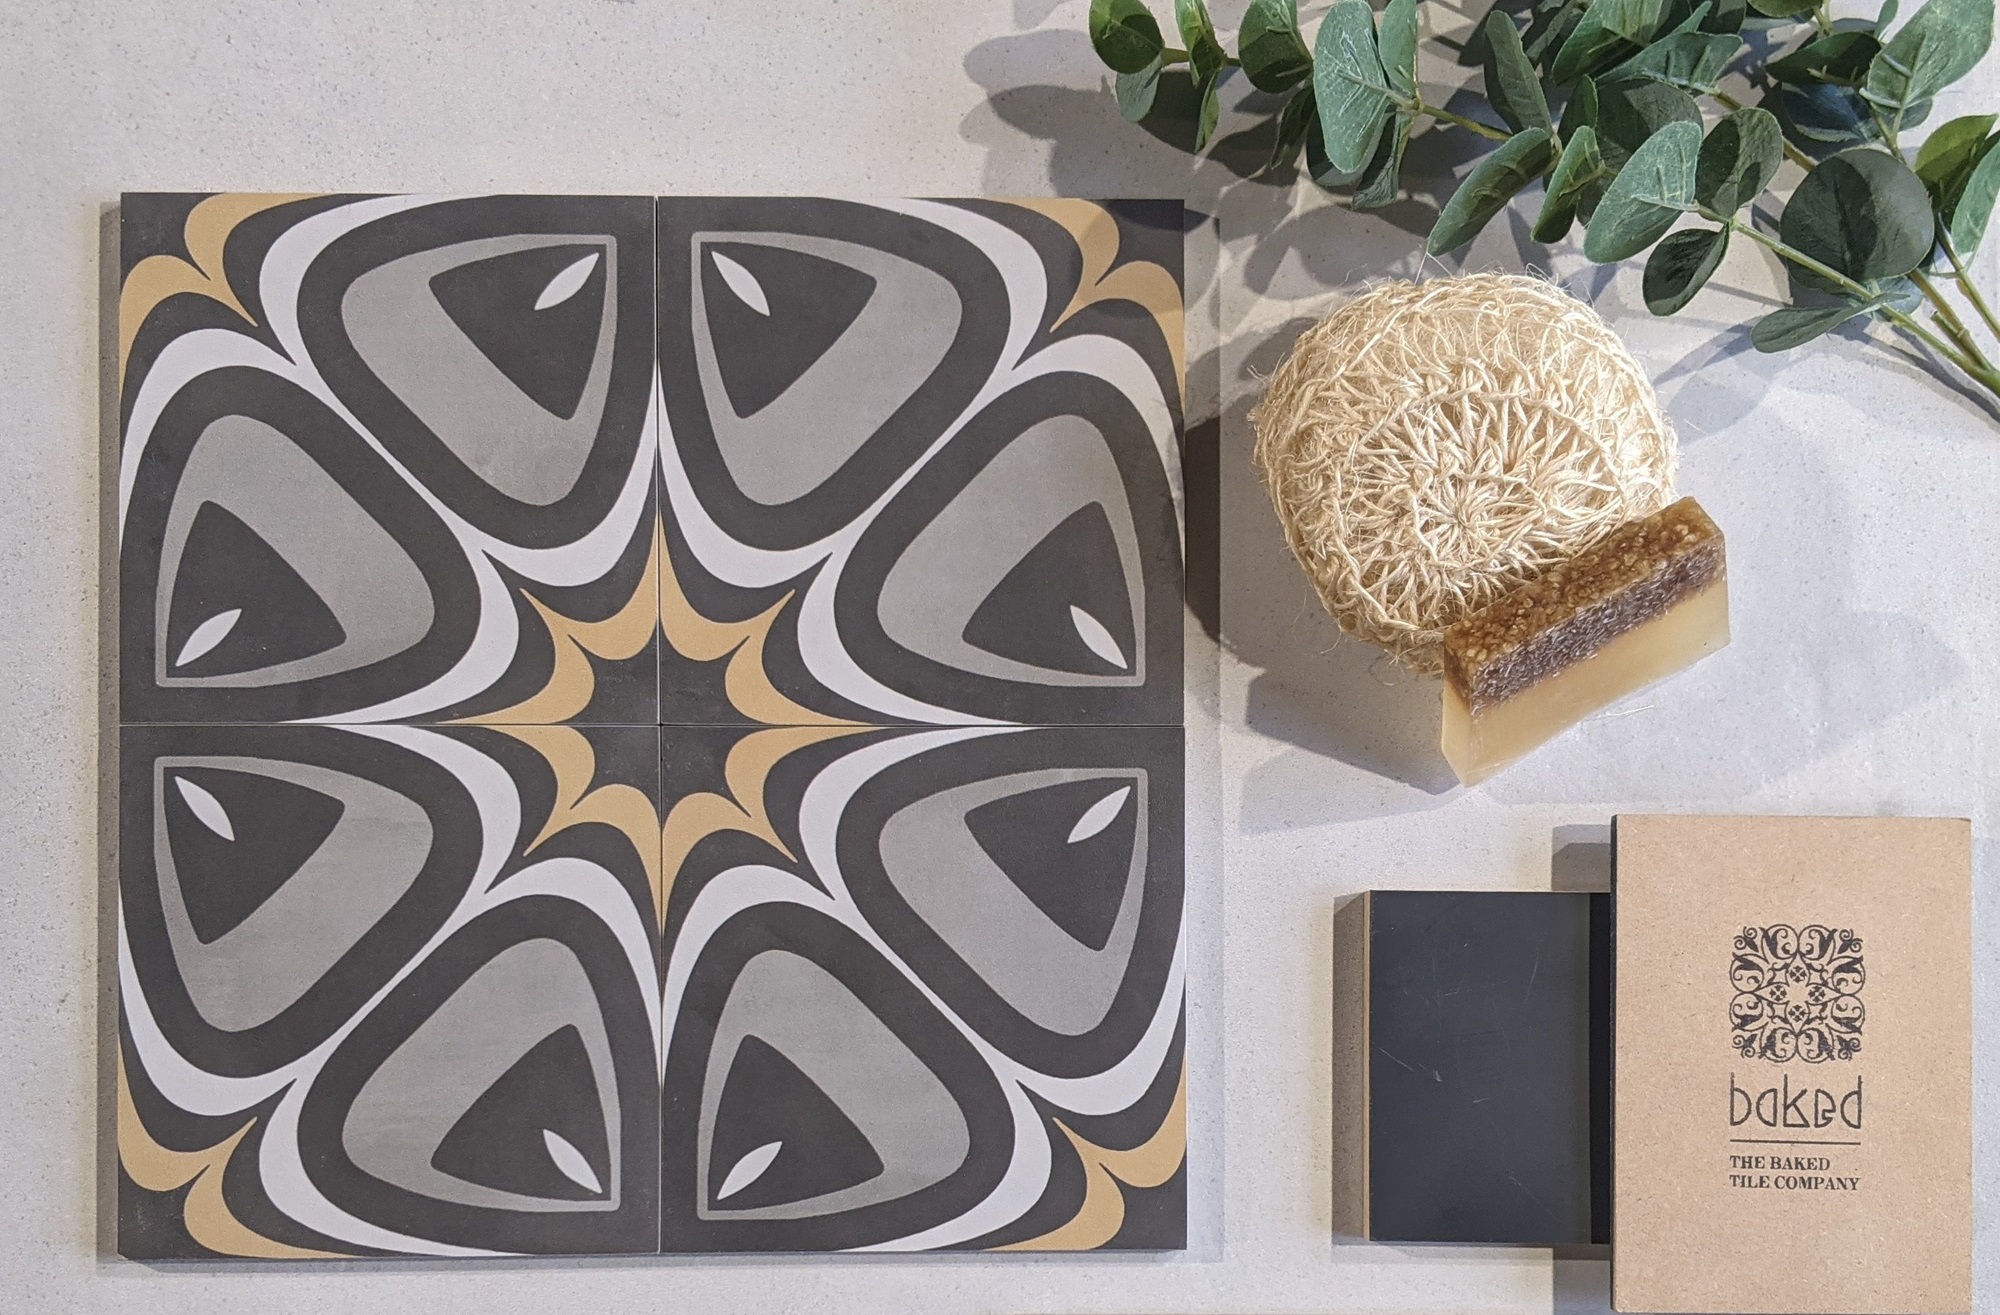 Step Back in Time with The Baked Tile Company’s Groovy Santana Collection